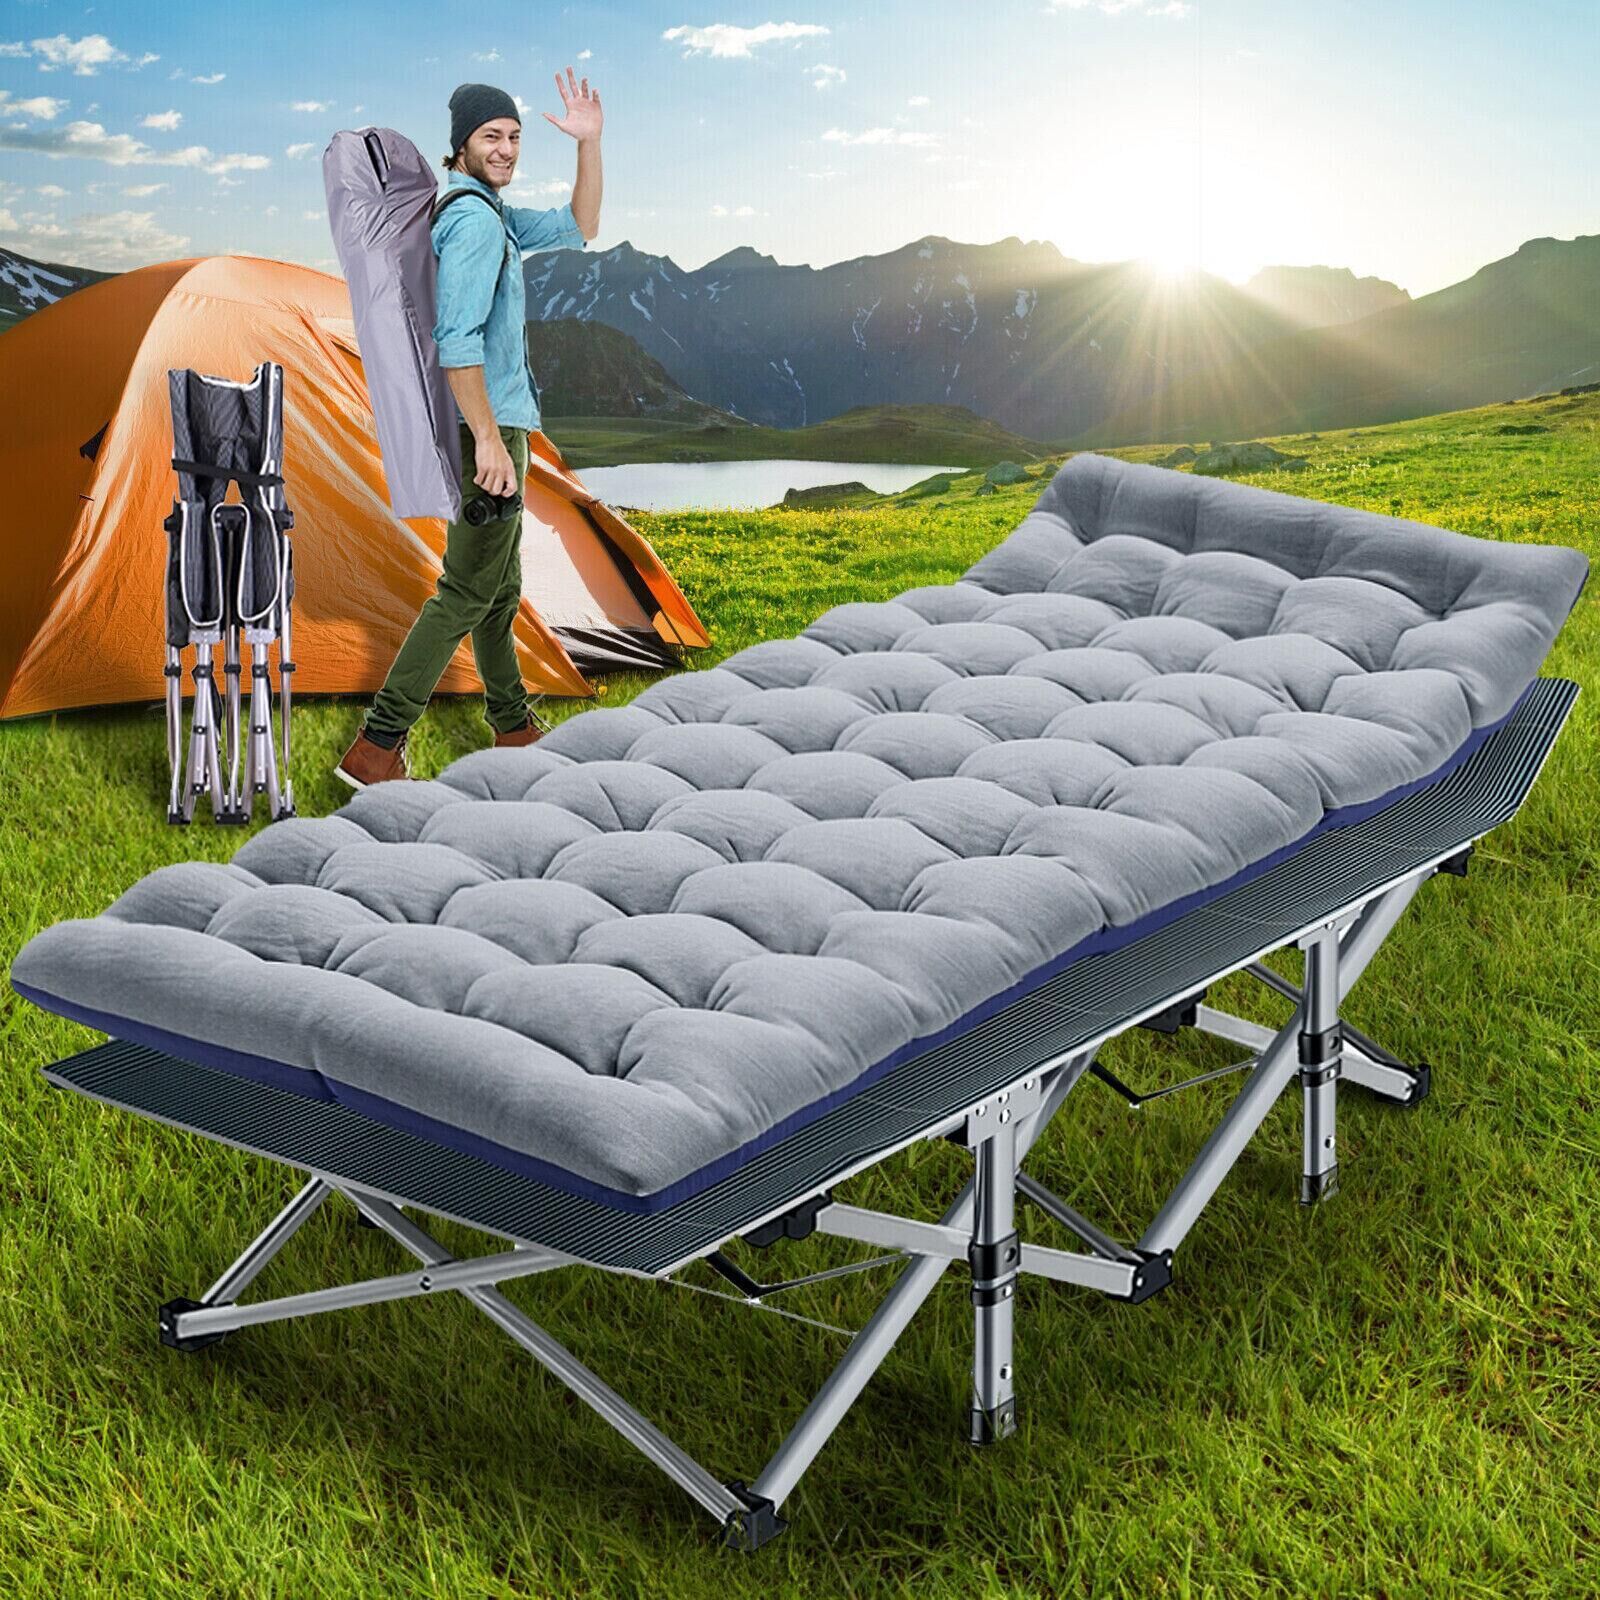 Heavy Duty Sleeping Cots with Carry Bag for Home, Office Nap and Outdoor Beach